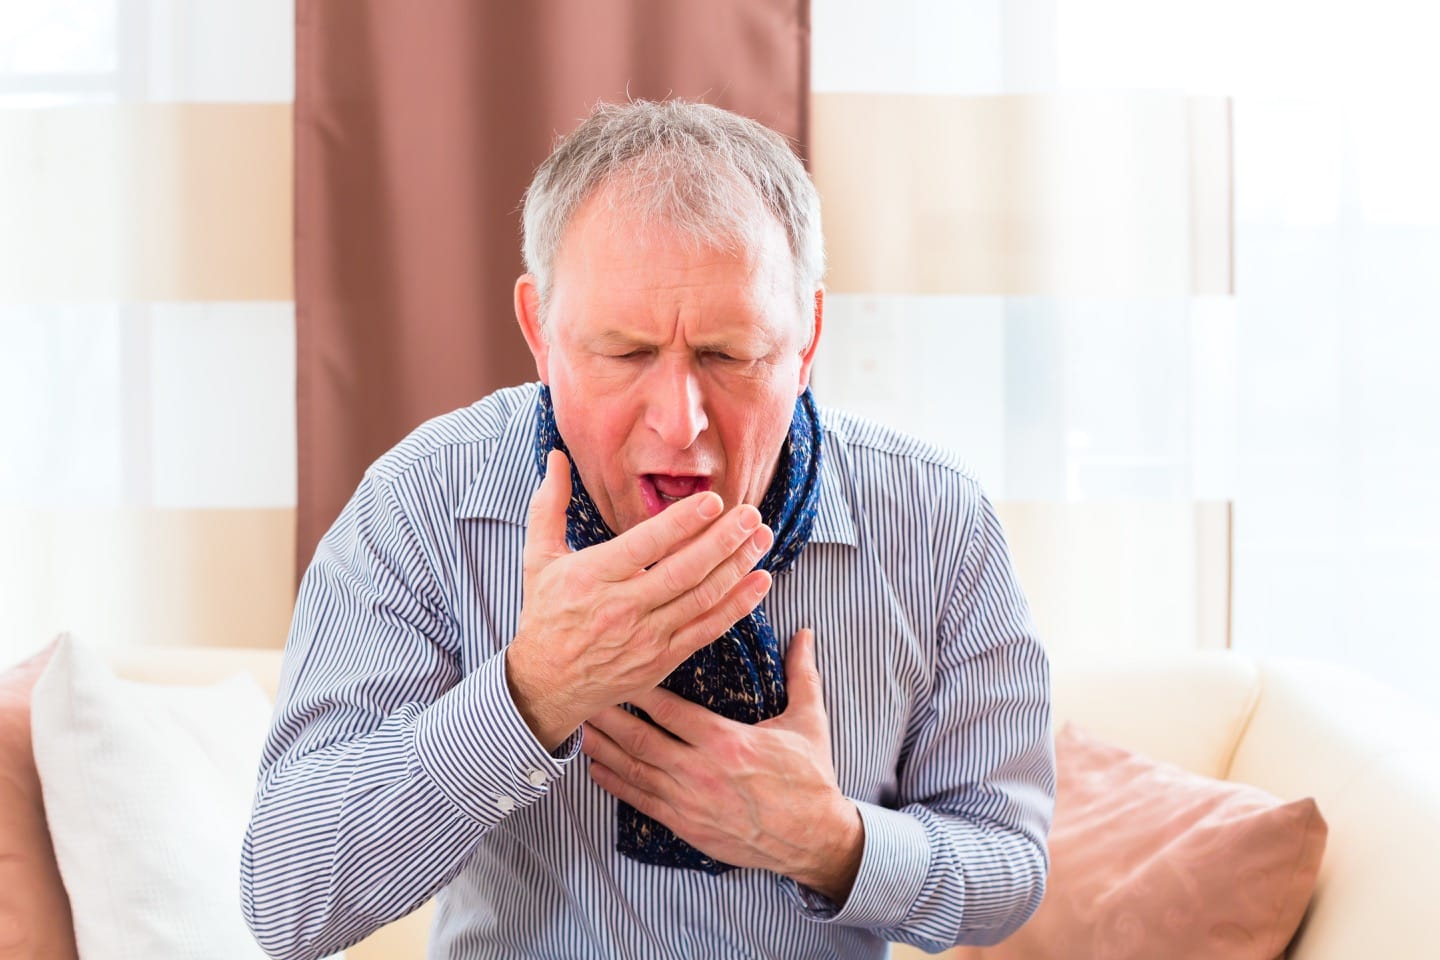 An old man coughing with one of his hand closing his mouth and the other hand to his chest